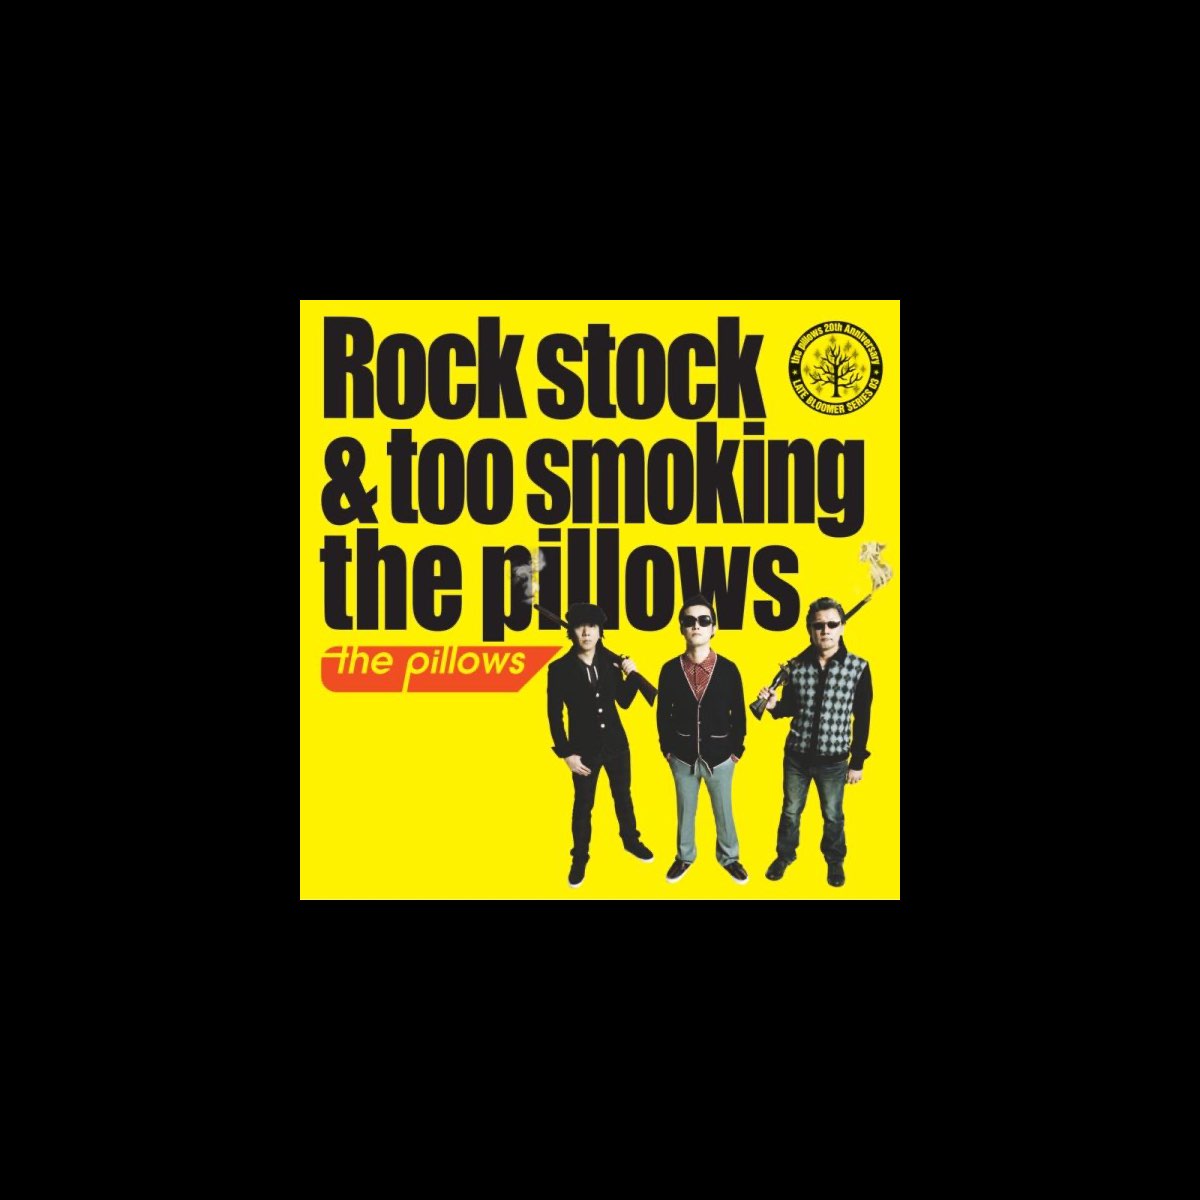 Rock stock & too smoking the pillows - Album by the pillows